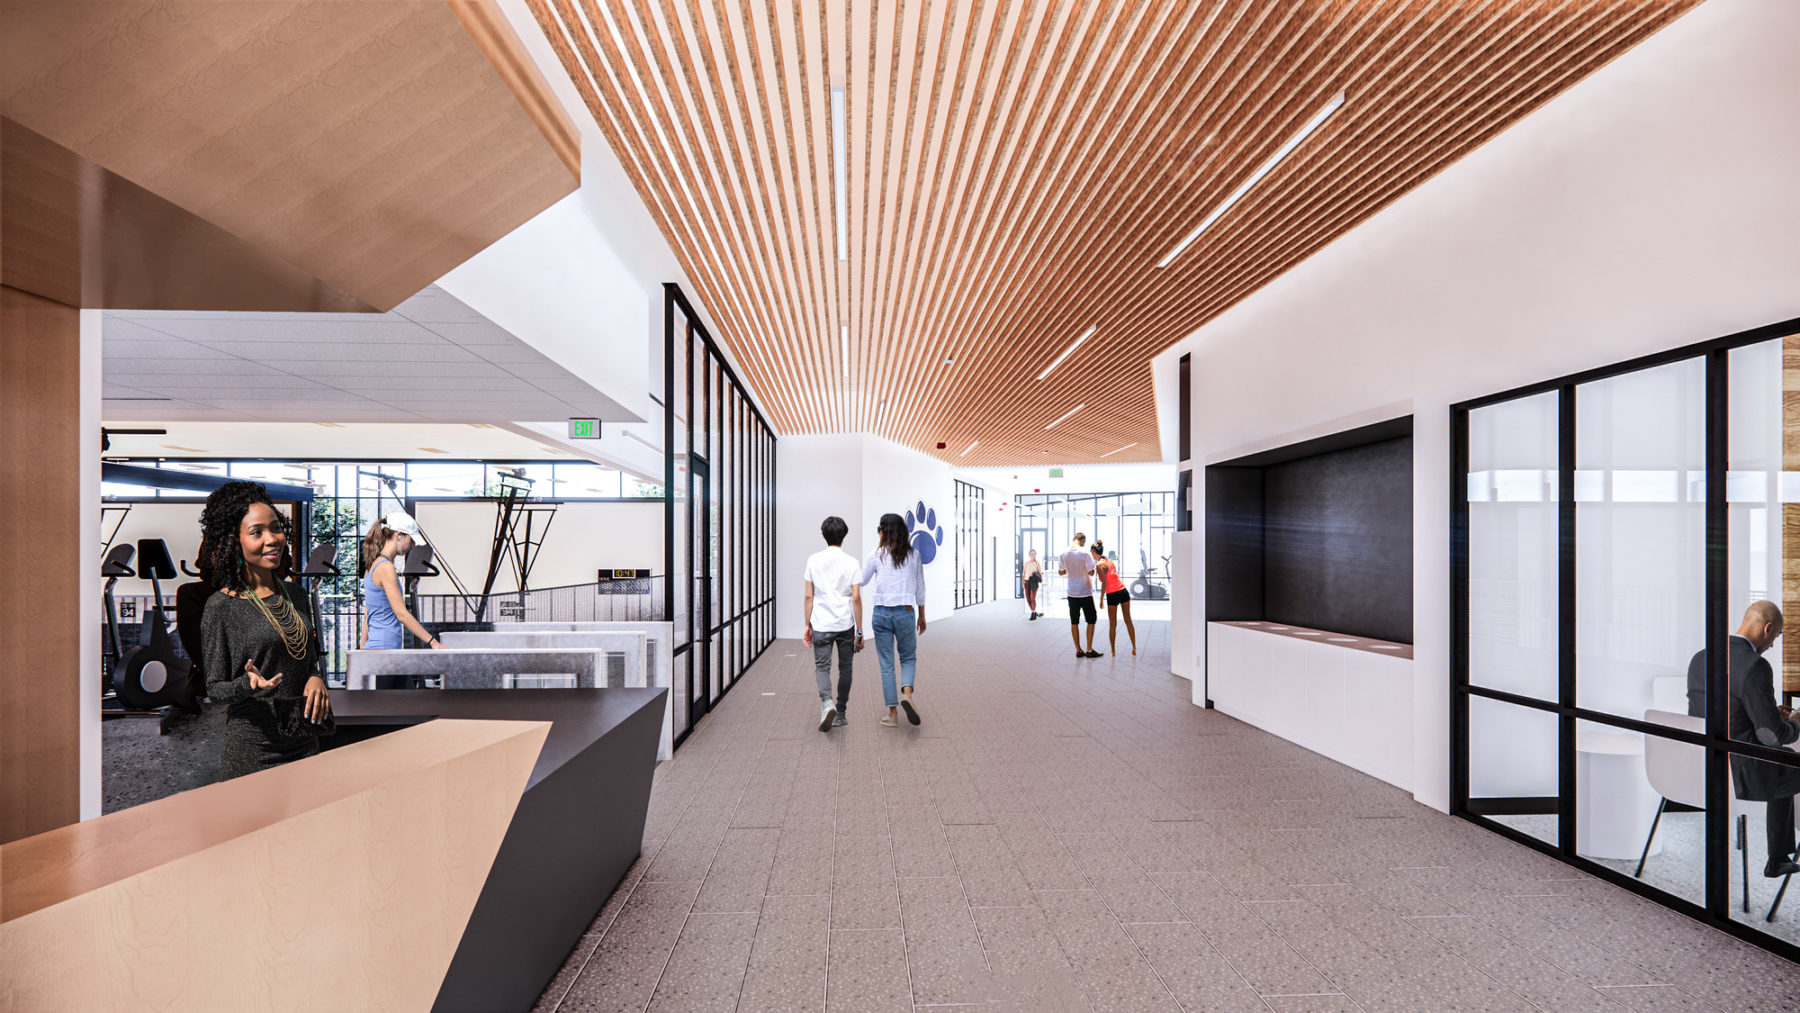 Interior rendering of building lobby. A woman stands behind the welcome desk and students walk along the hallway.